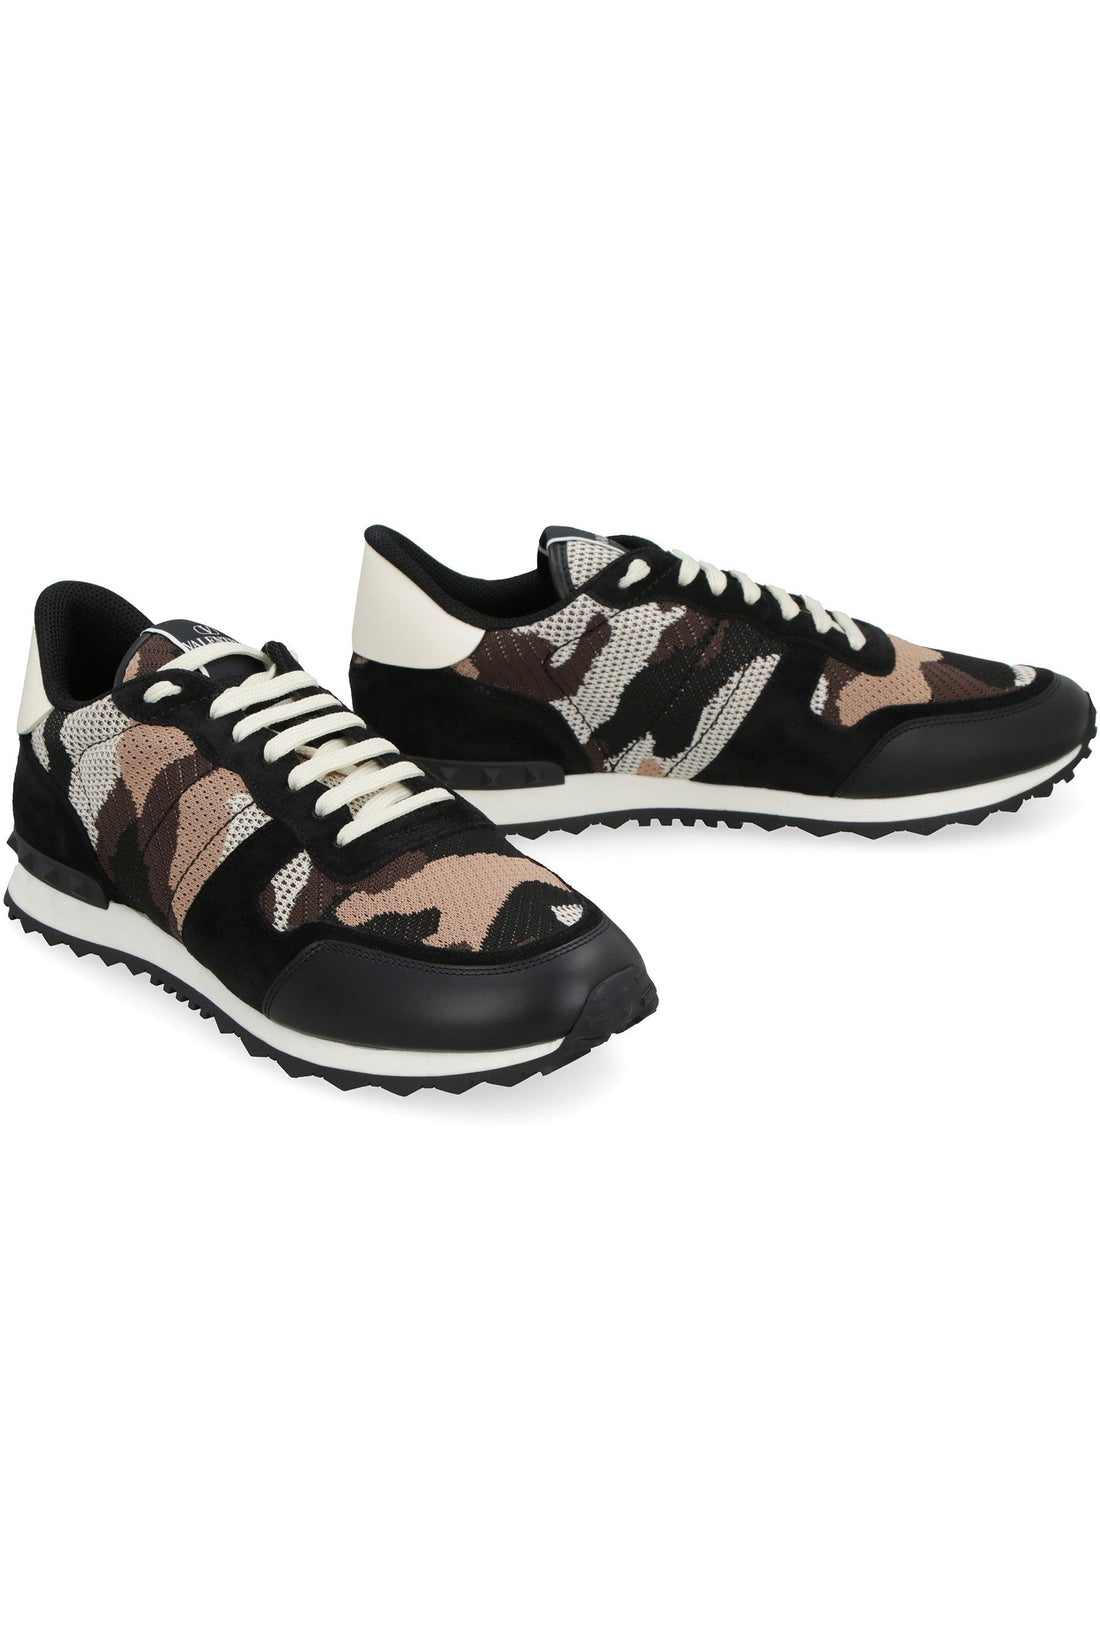 Valentino-OUTLET-SALE-Rockrunner fabric low-top sneakers-ARCHIVIST